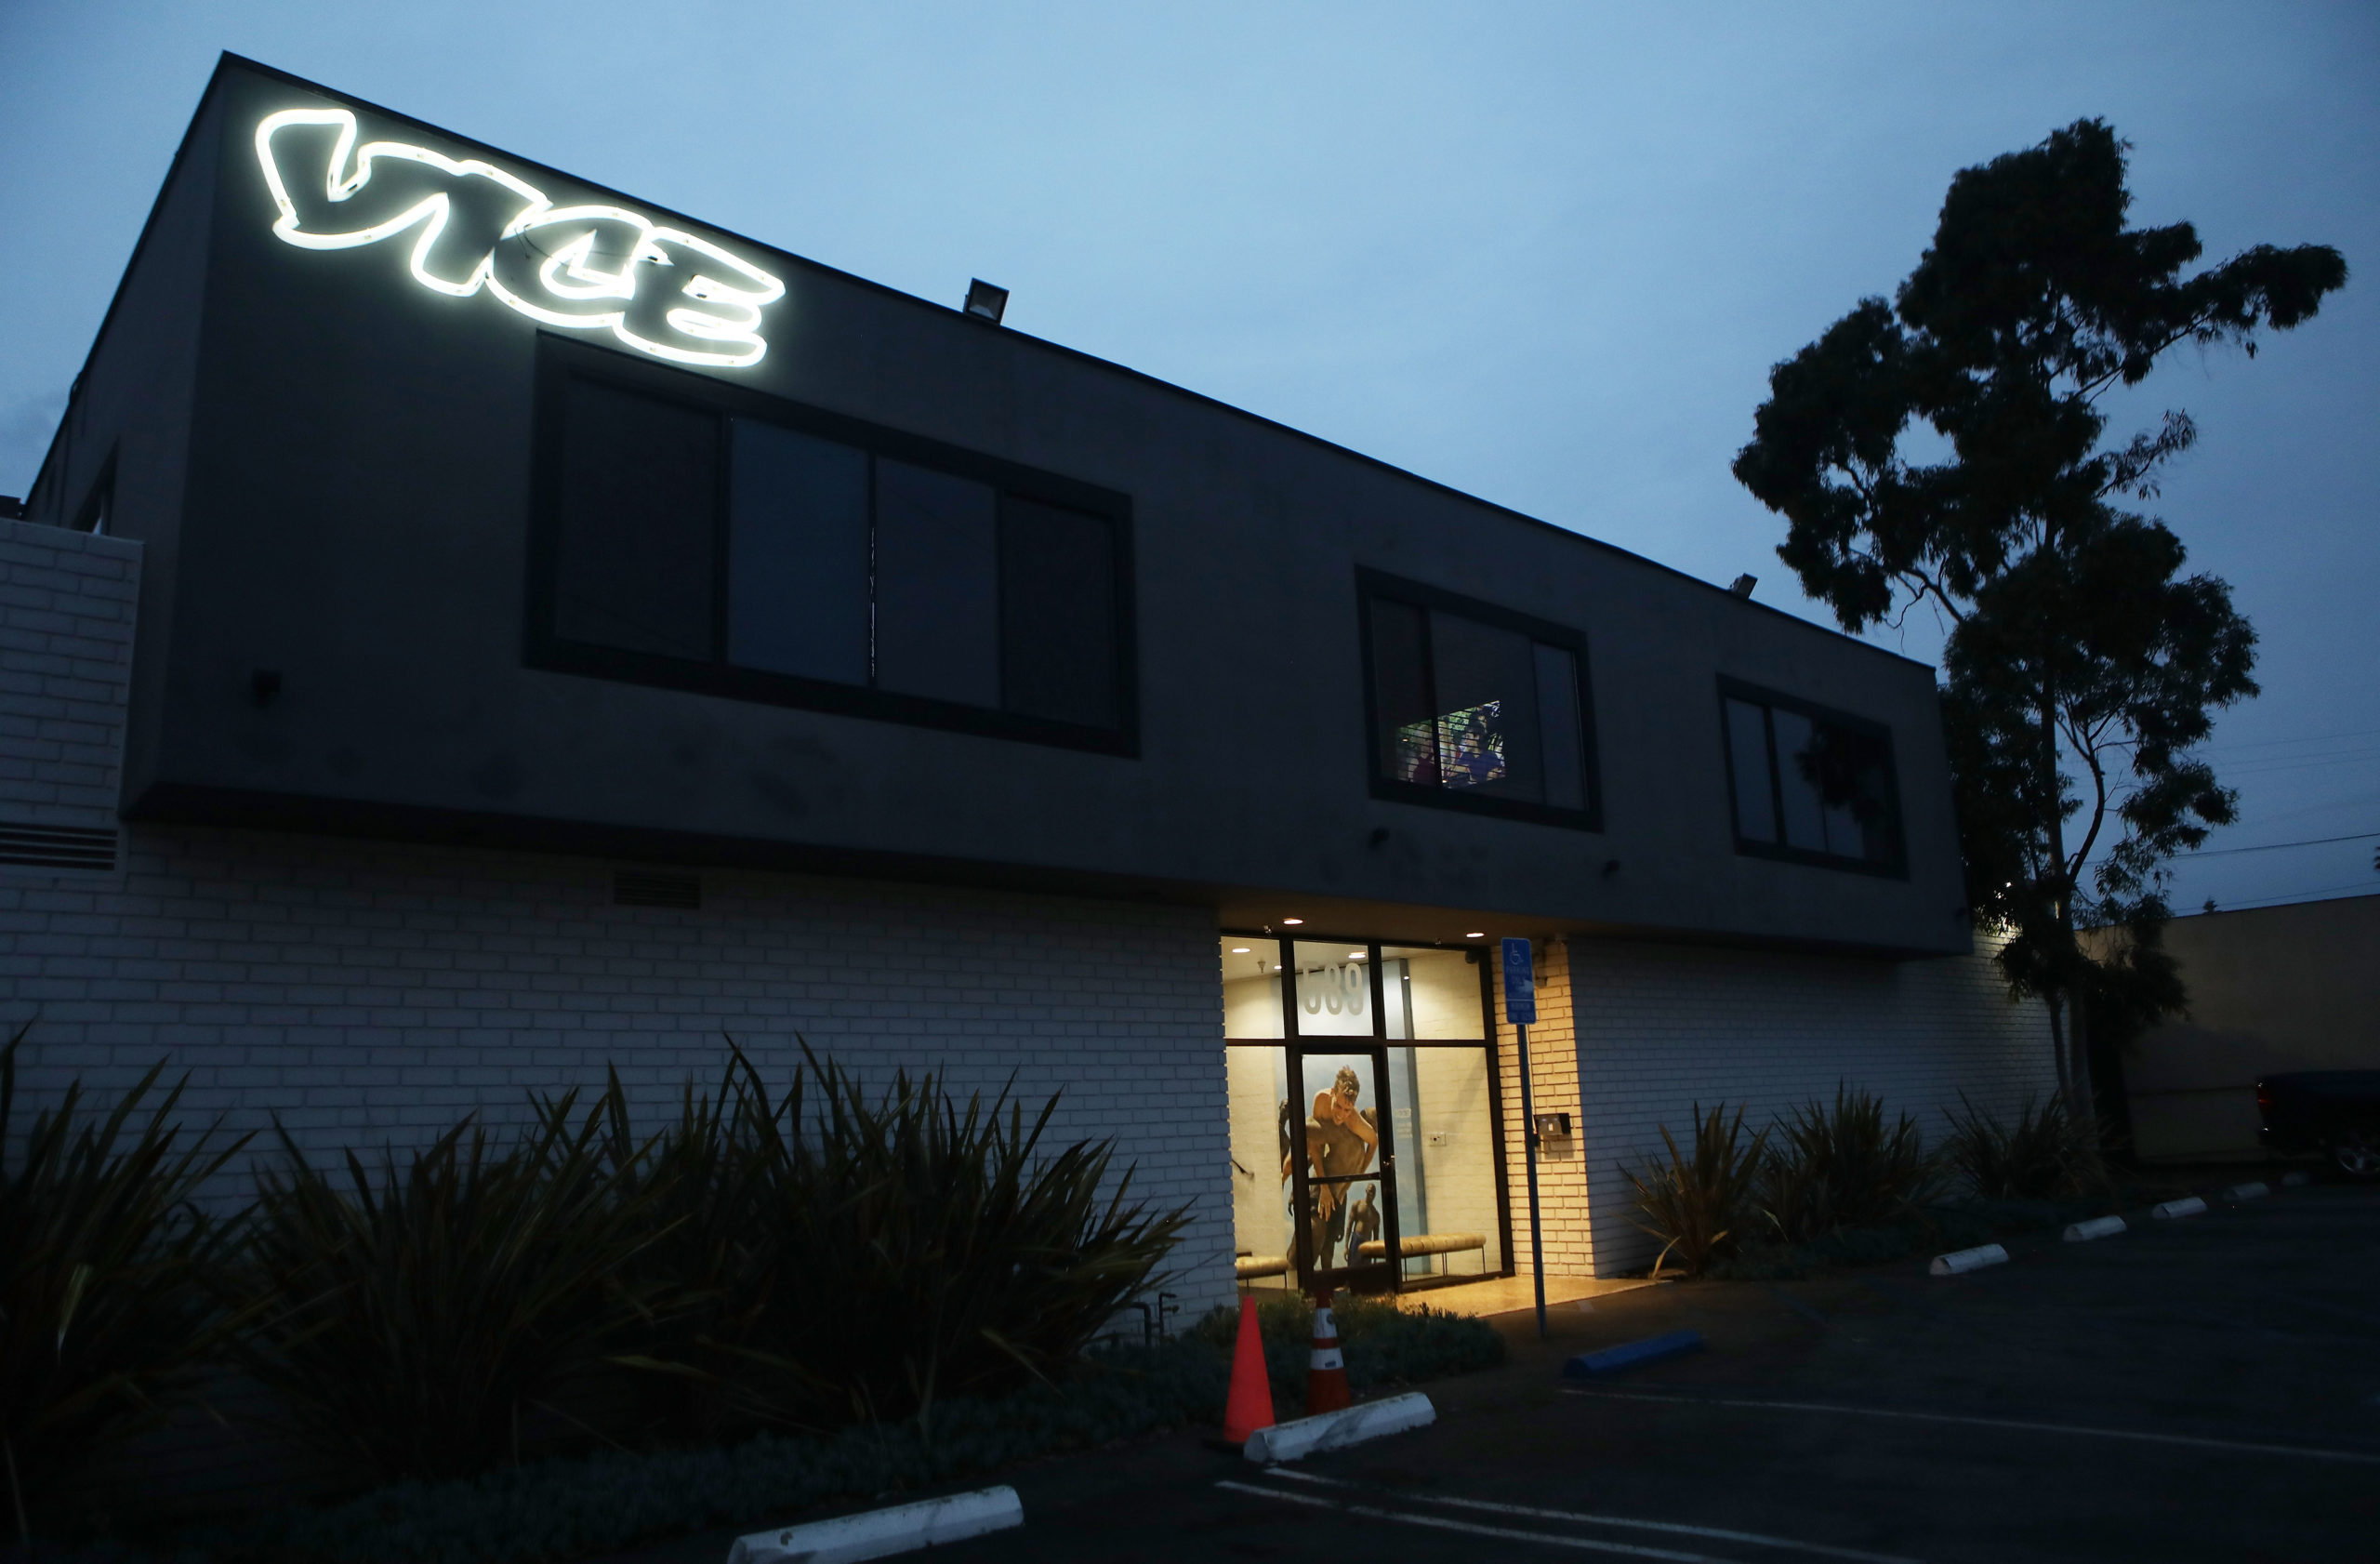 VENICE, CA - FEBRUARY 01: Vice Media offices display the Vice logo at dusk on February 1, 2019 in Venice, California. (Photo by Mario Tama/Getty Images)